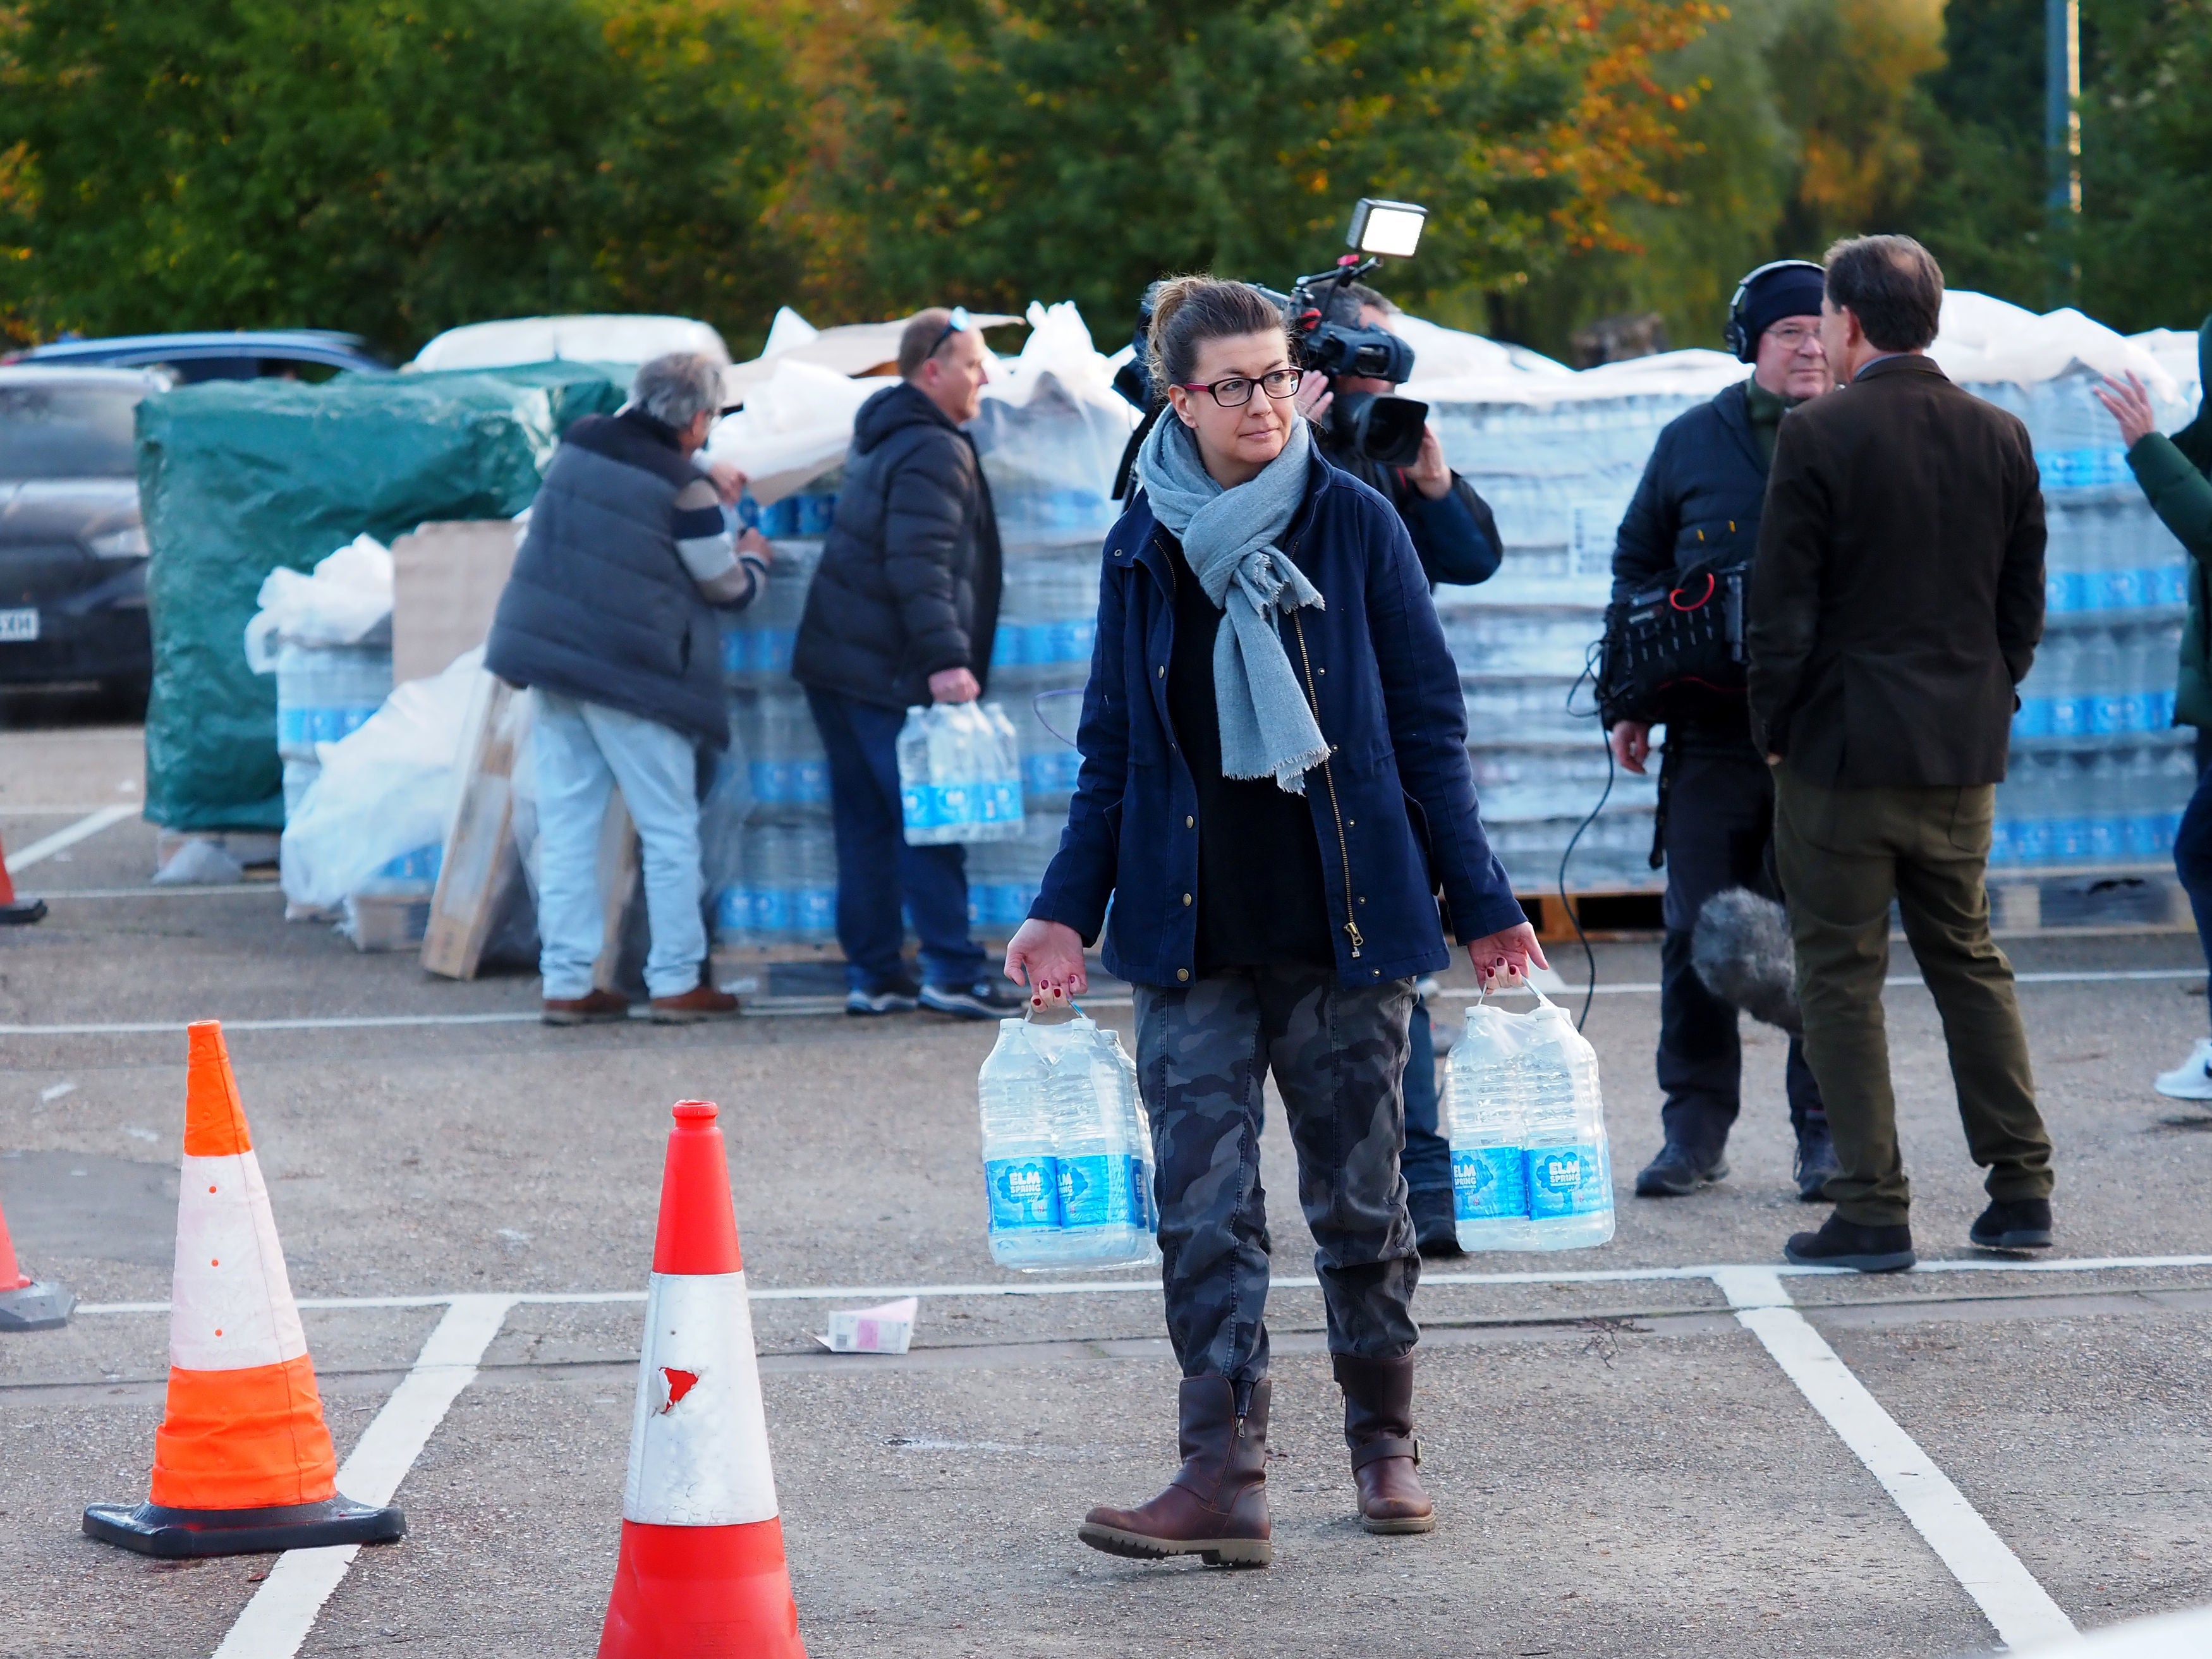 A Surrey resident collects bottled water amid shortages caused by Storm Ciarán